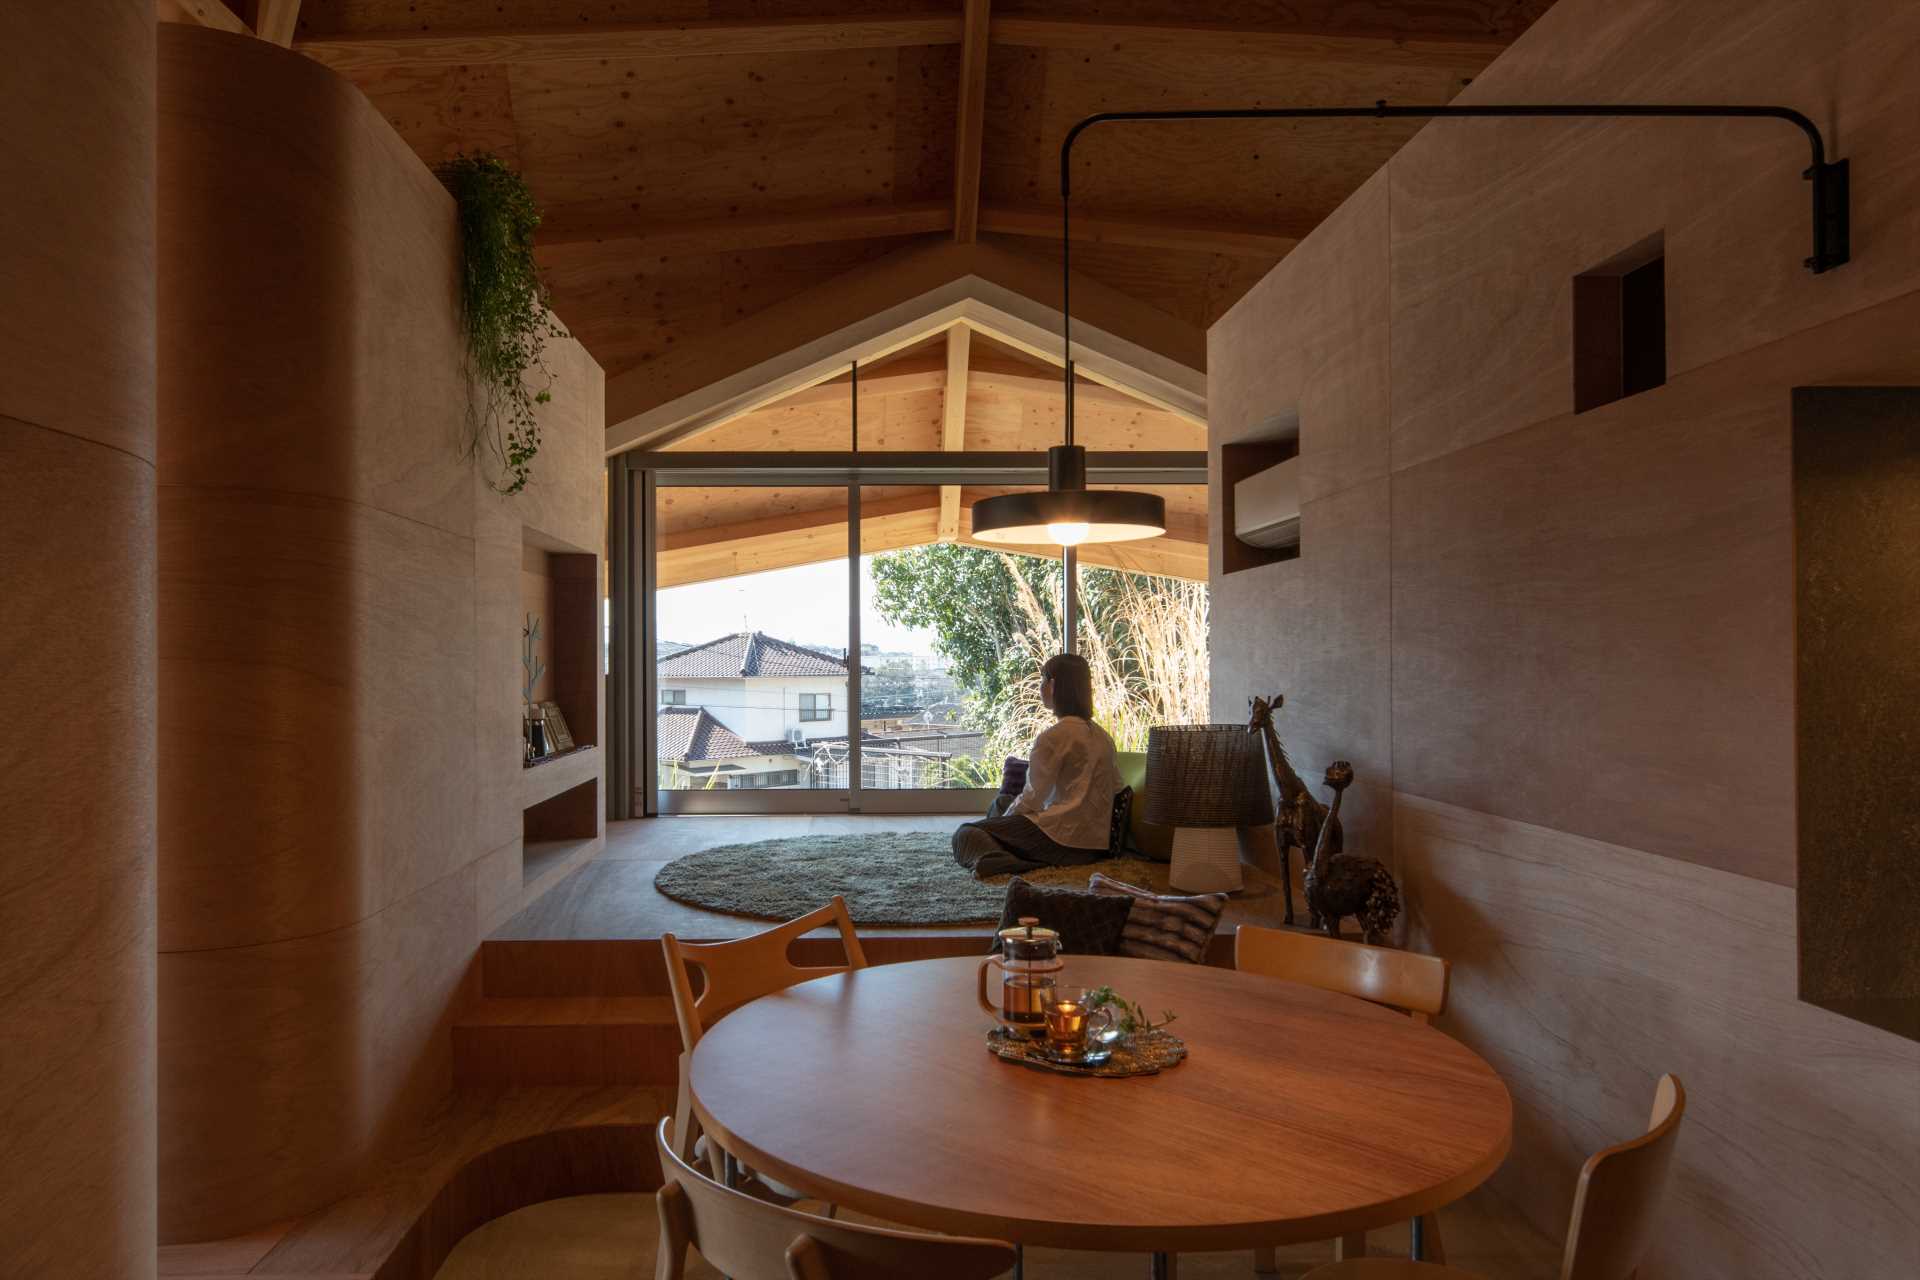 A modern Japanese house with a raised seating area.